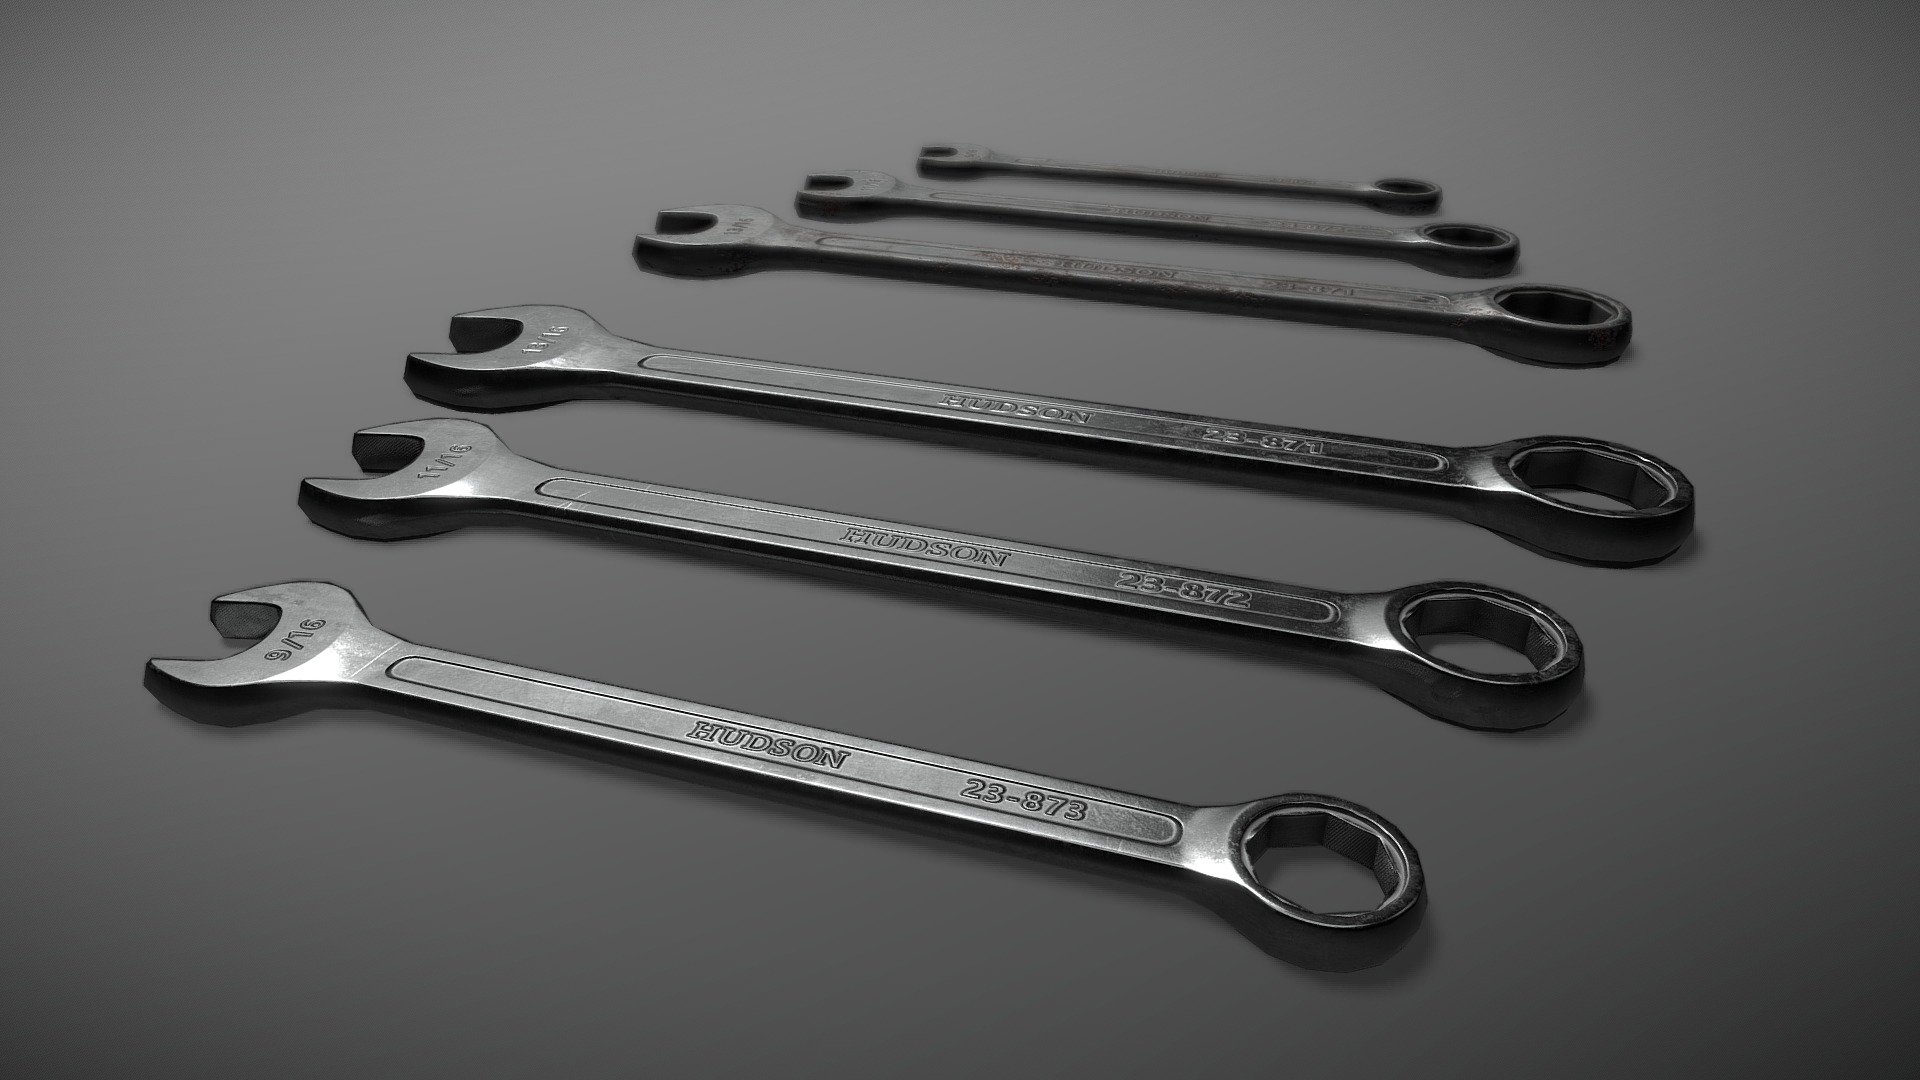 Free to everyone to use for anything. All I ask is that you consider me for your 3D projects! You can contact me at OliverTriplett3D@gmail.com

See the wrenches in action here https://www.artstation.com/artwork/XB28XD - Combination Wrench (Clean/Dirty) - Download Free 3D model by Oliver Triplett (@OliverTriplett) 3d model